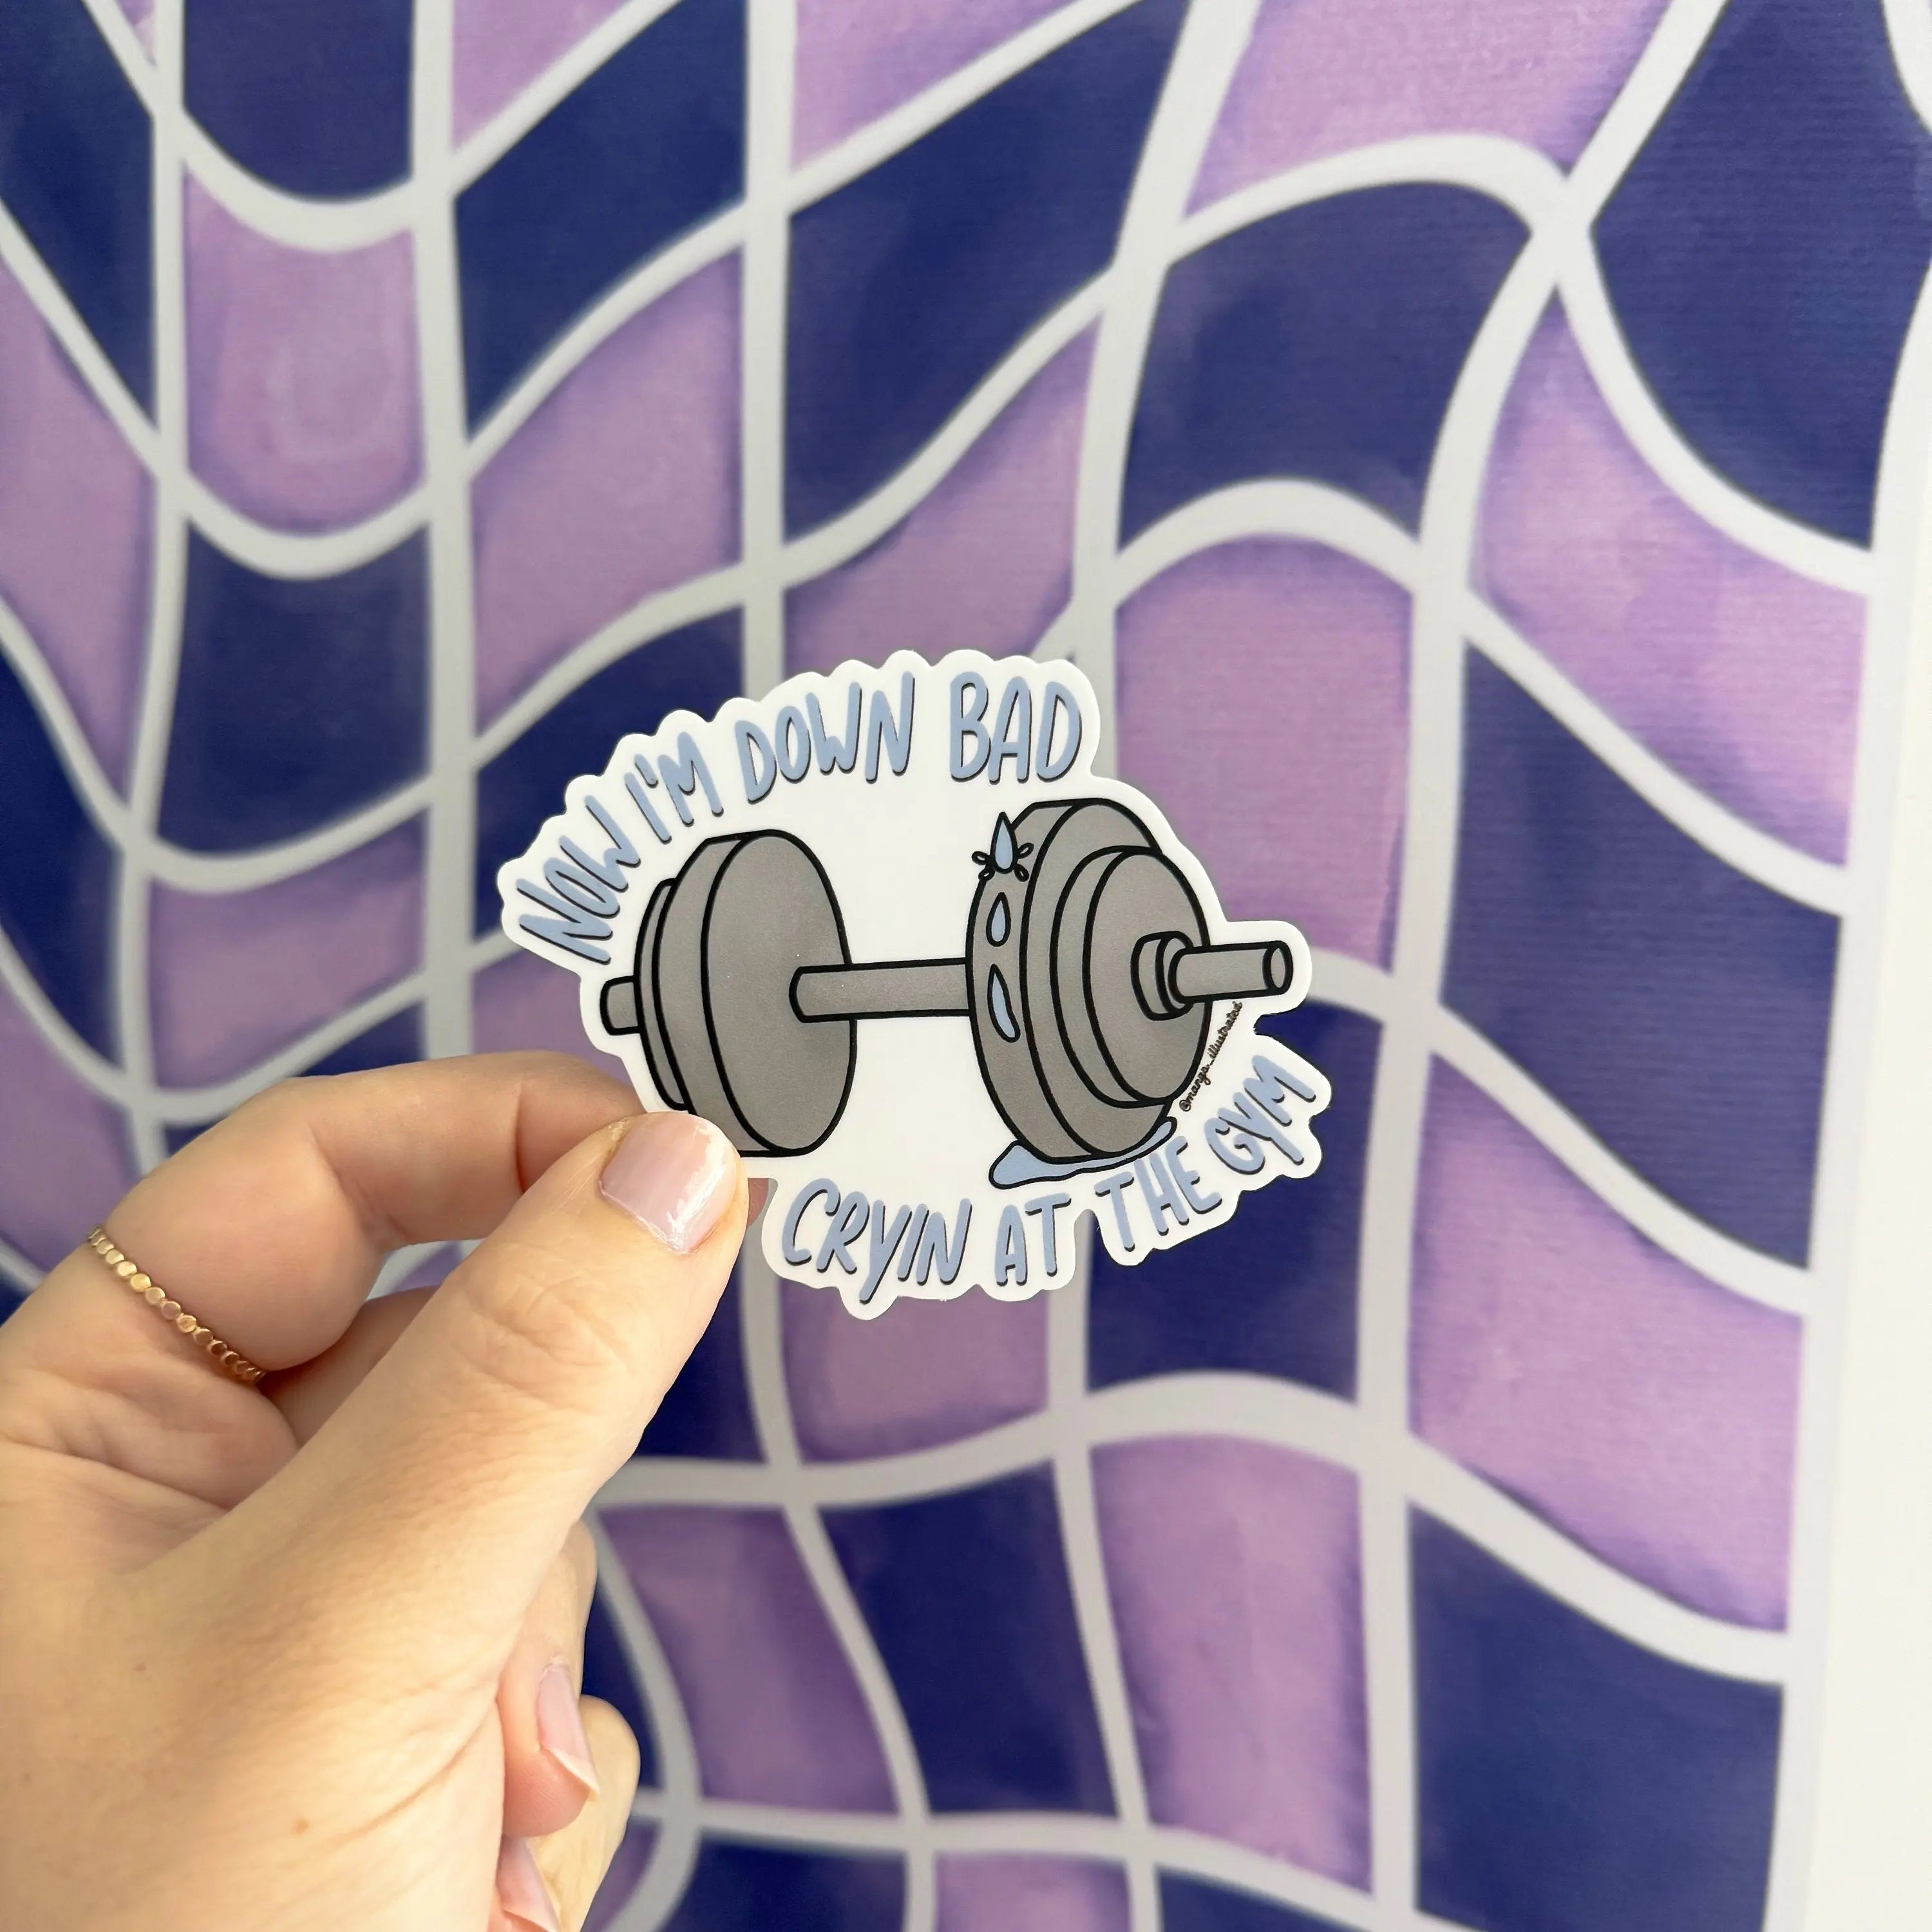 Down Bad crying at the gym sticker MangoIllustrated